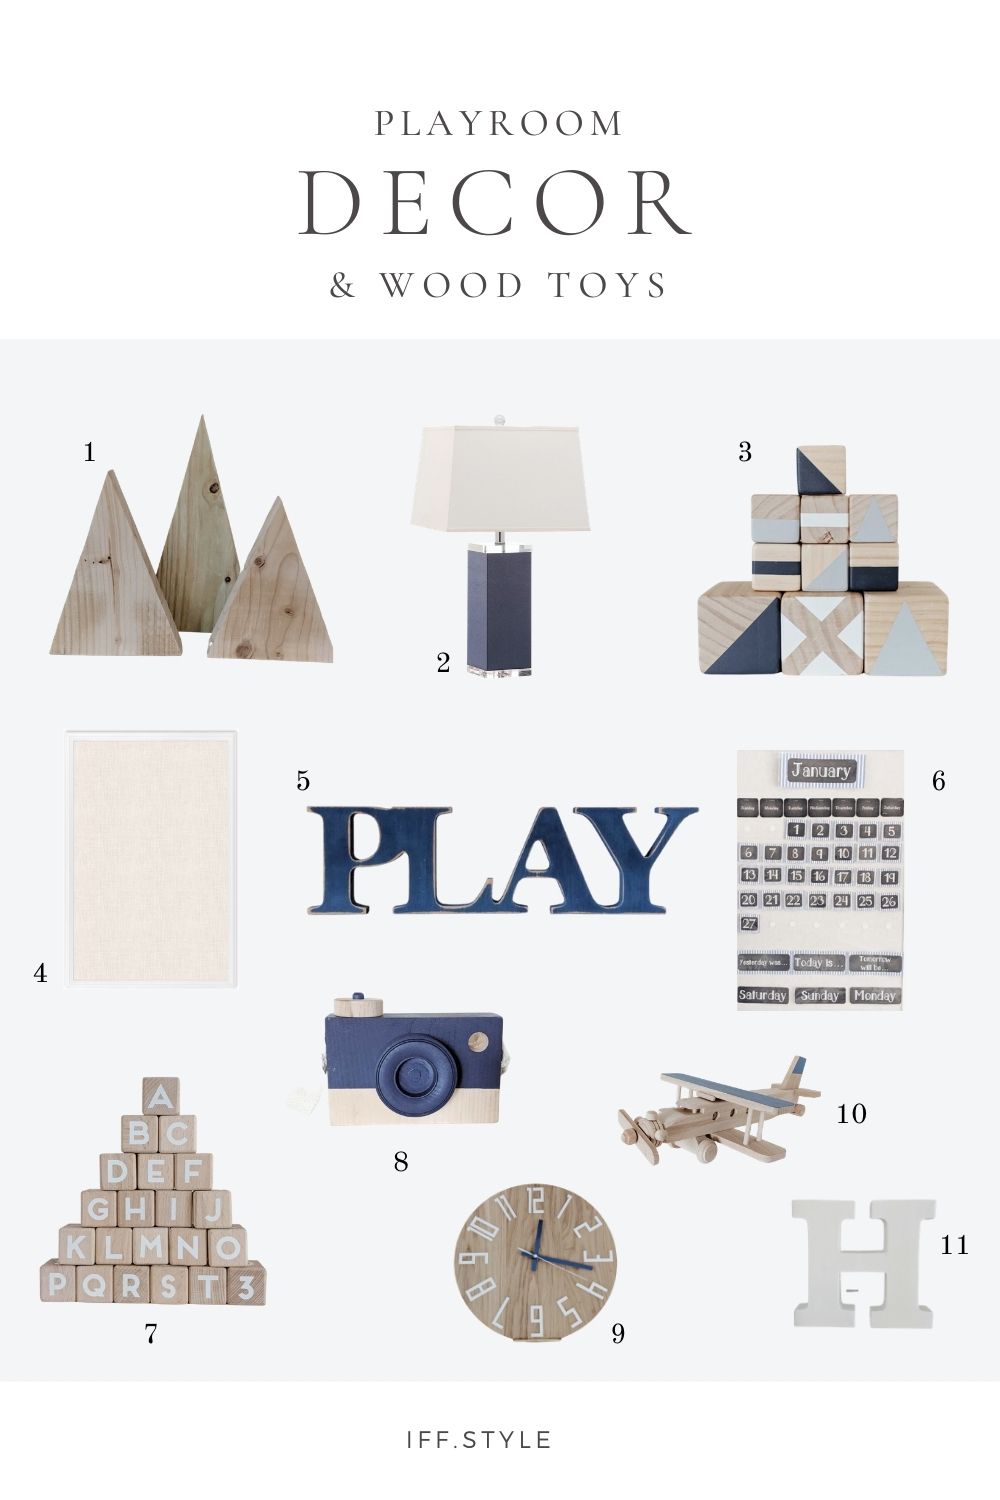 HD-Playroom Pinterest Pin Collage all items toys and storage